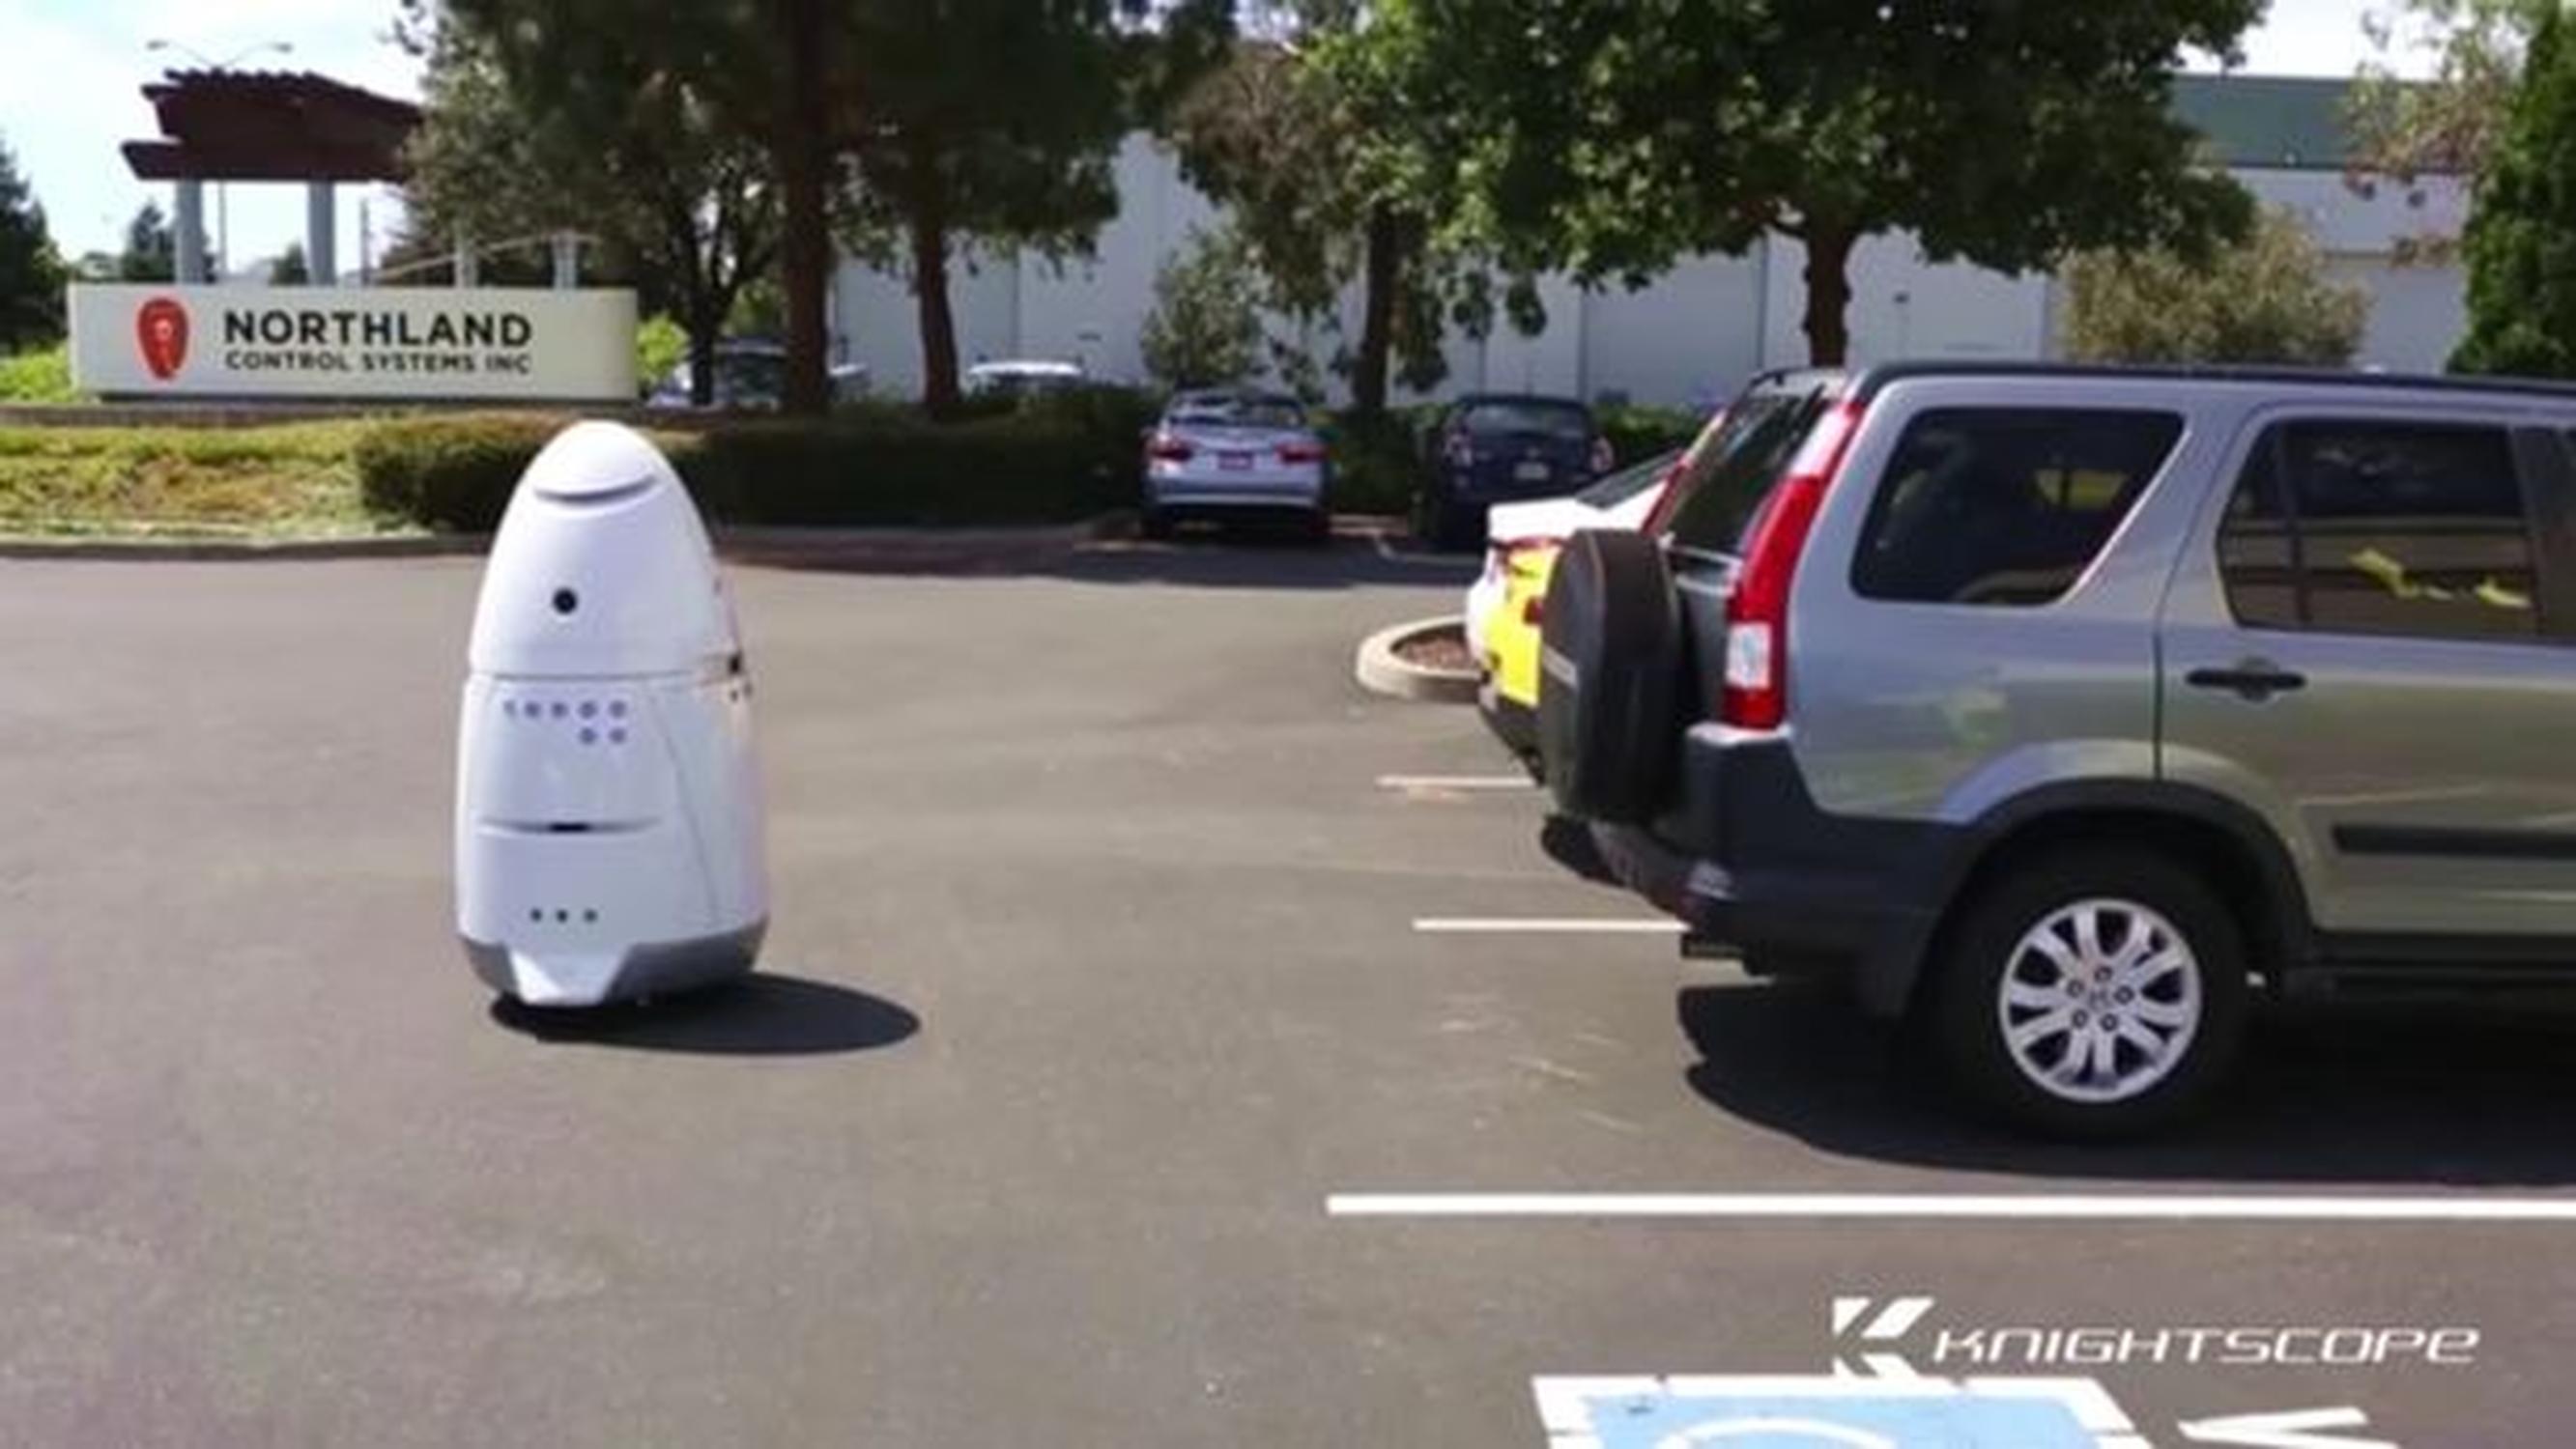 A Knightscope K2 robot patrolling a car park